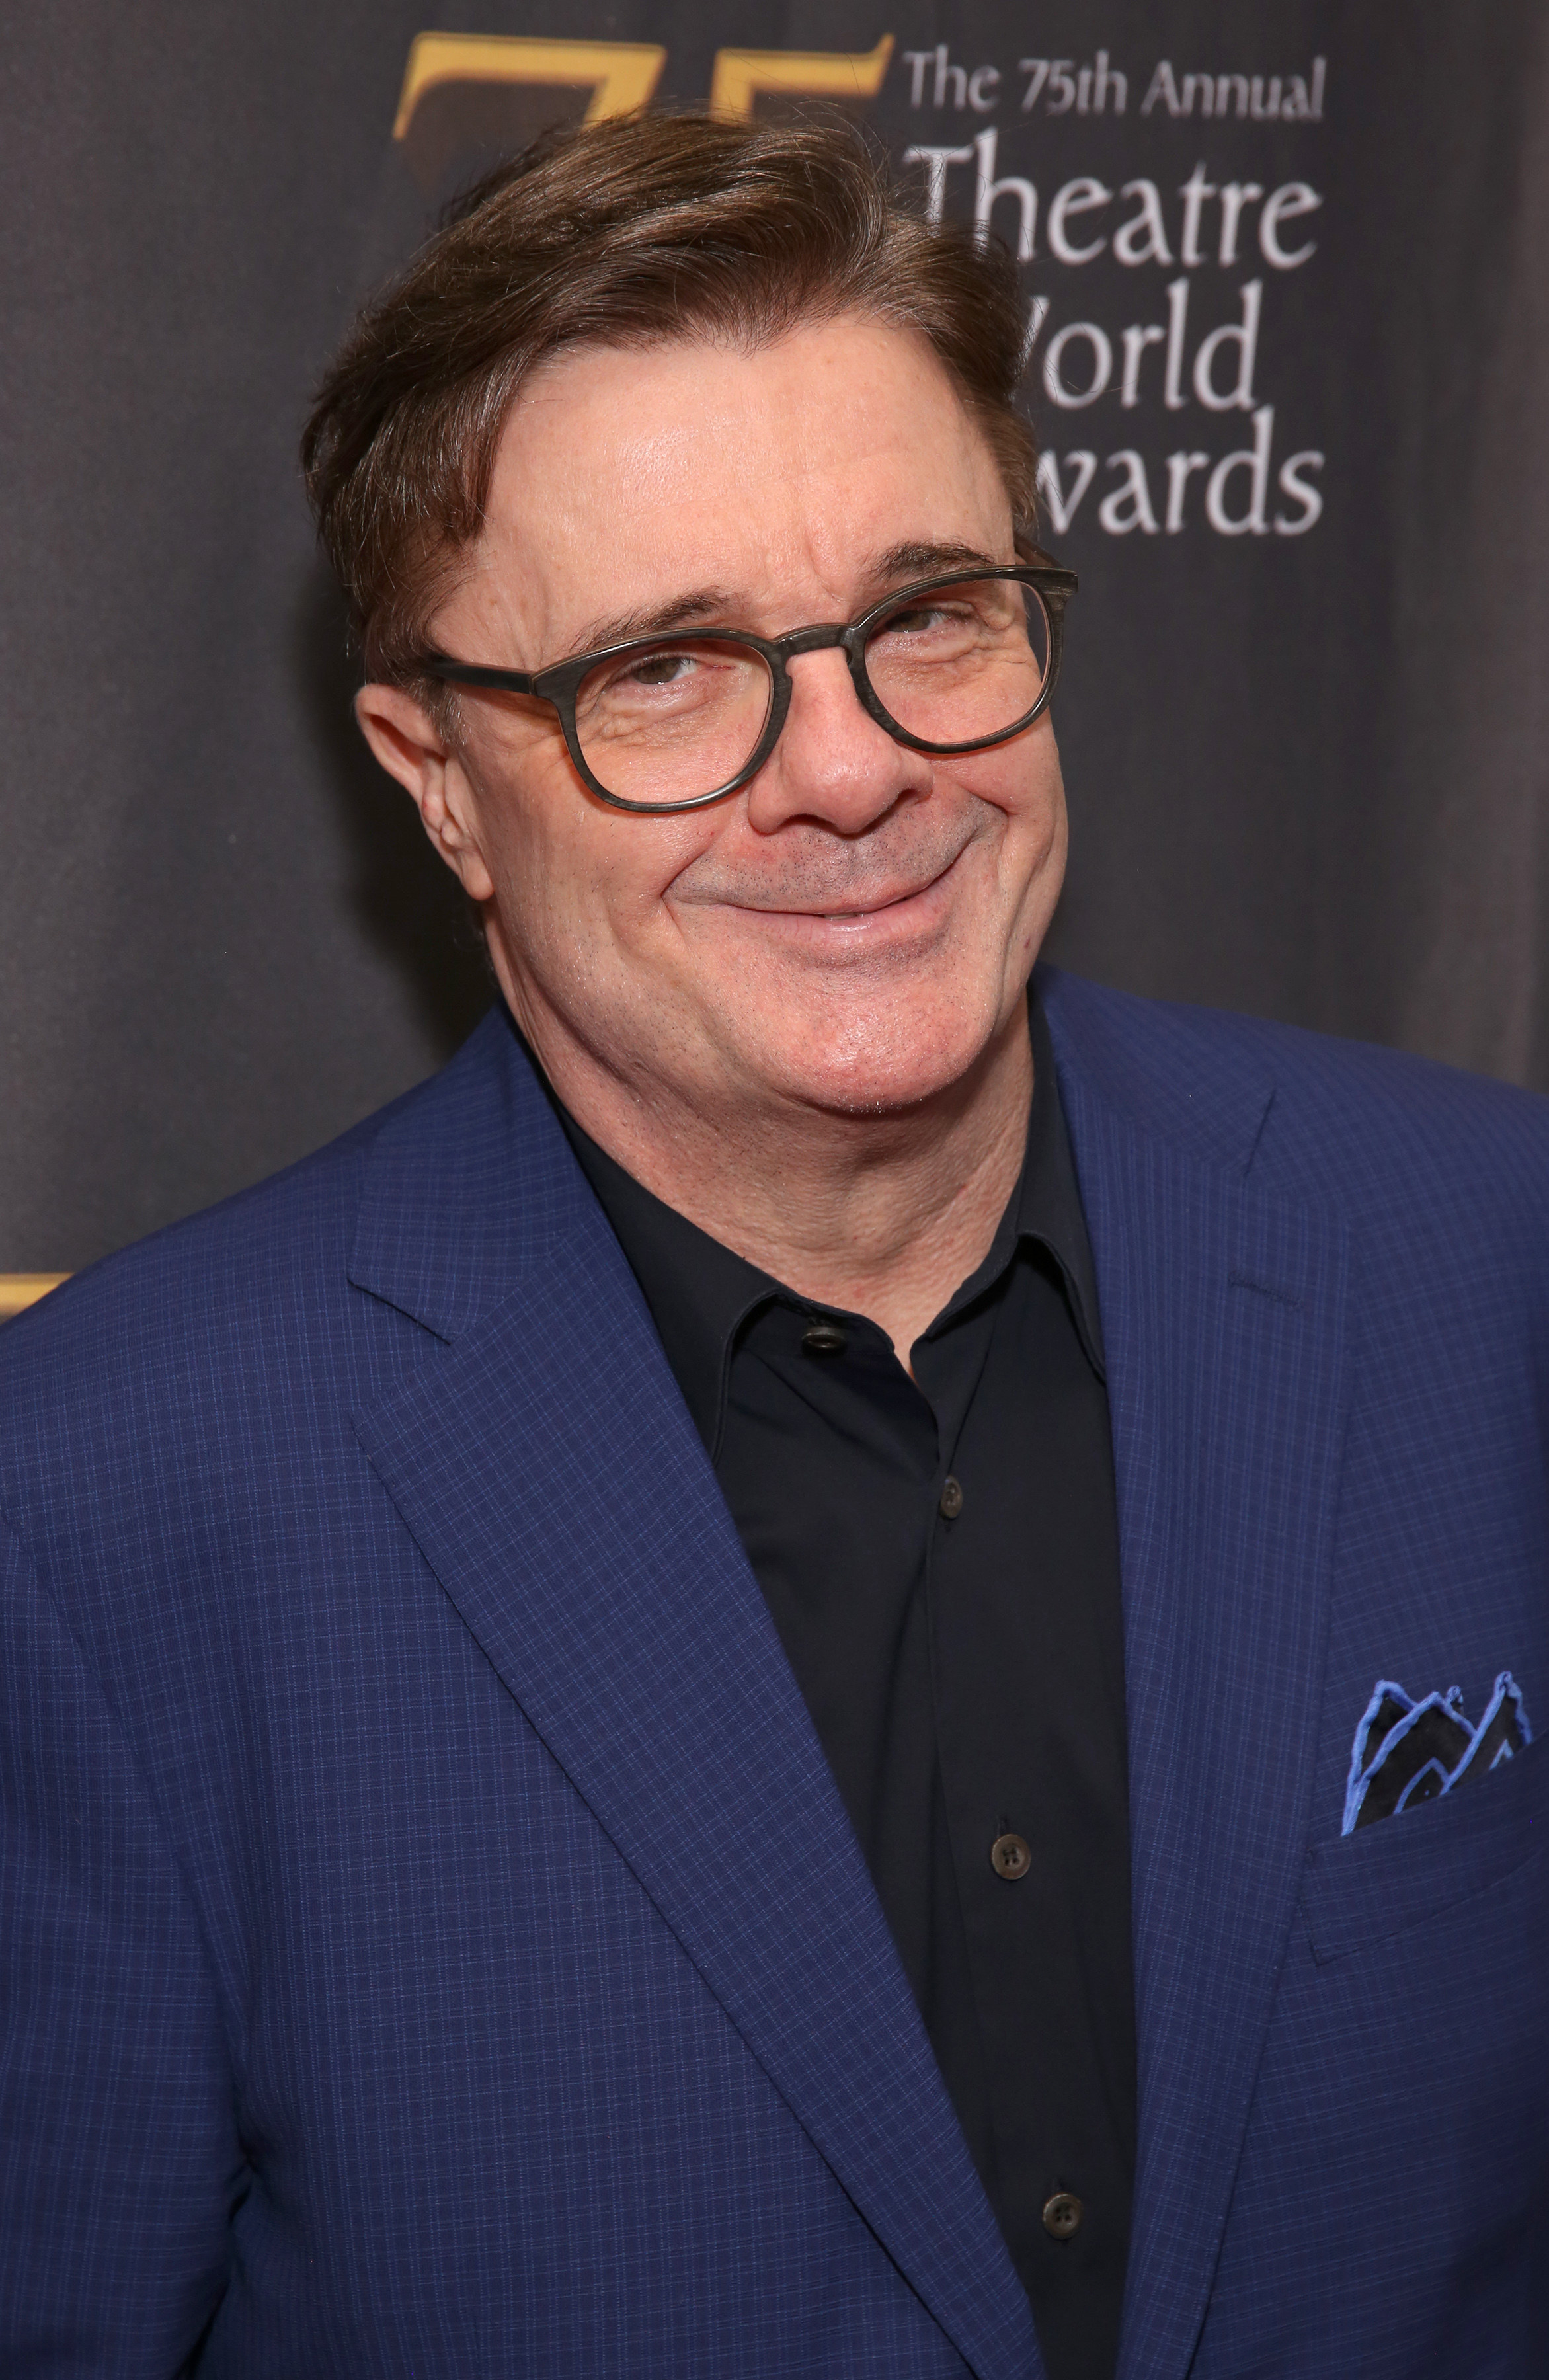 Nathan Lane smiles at the 75th Annual Theatre World Awards in June 2019